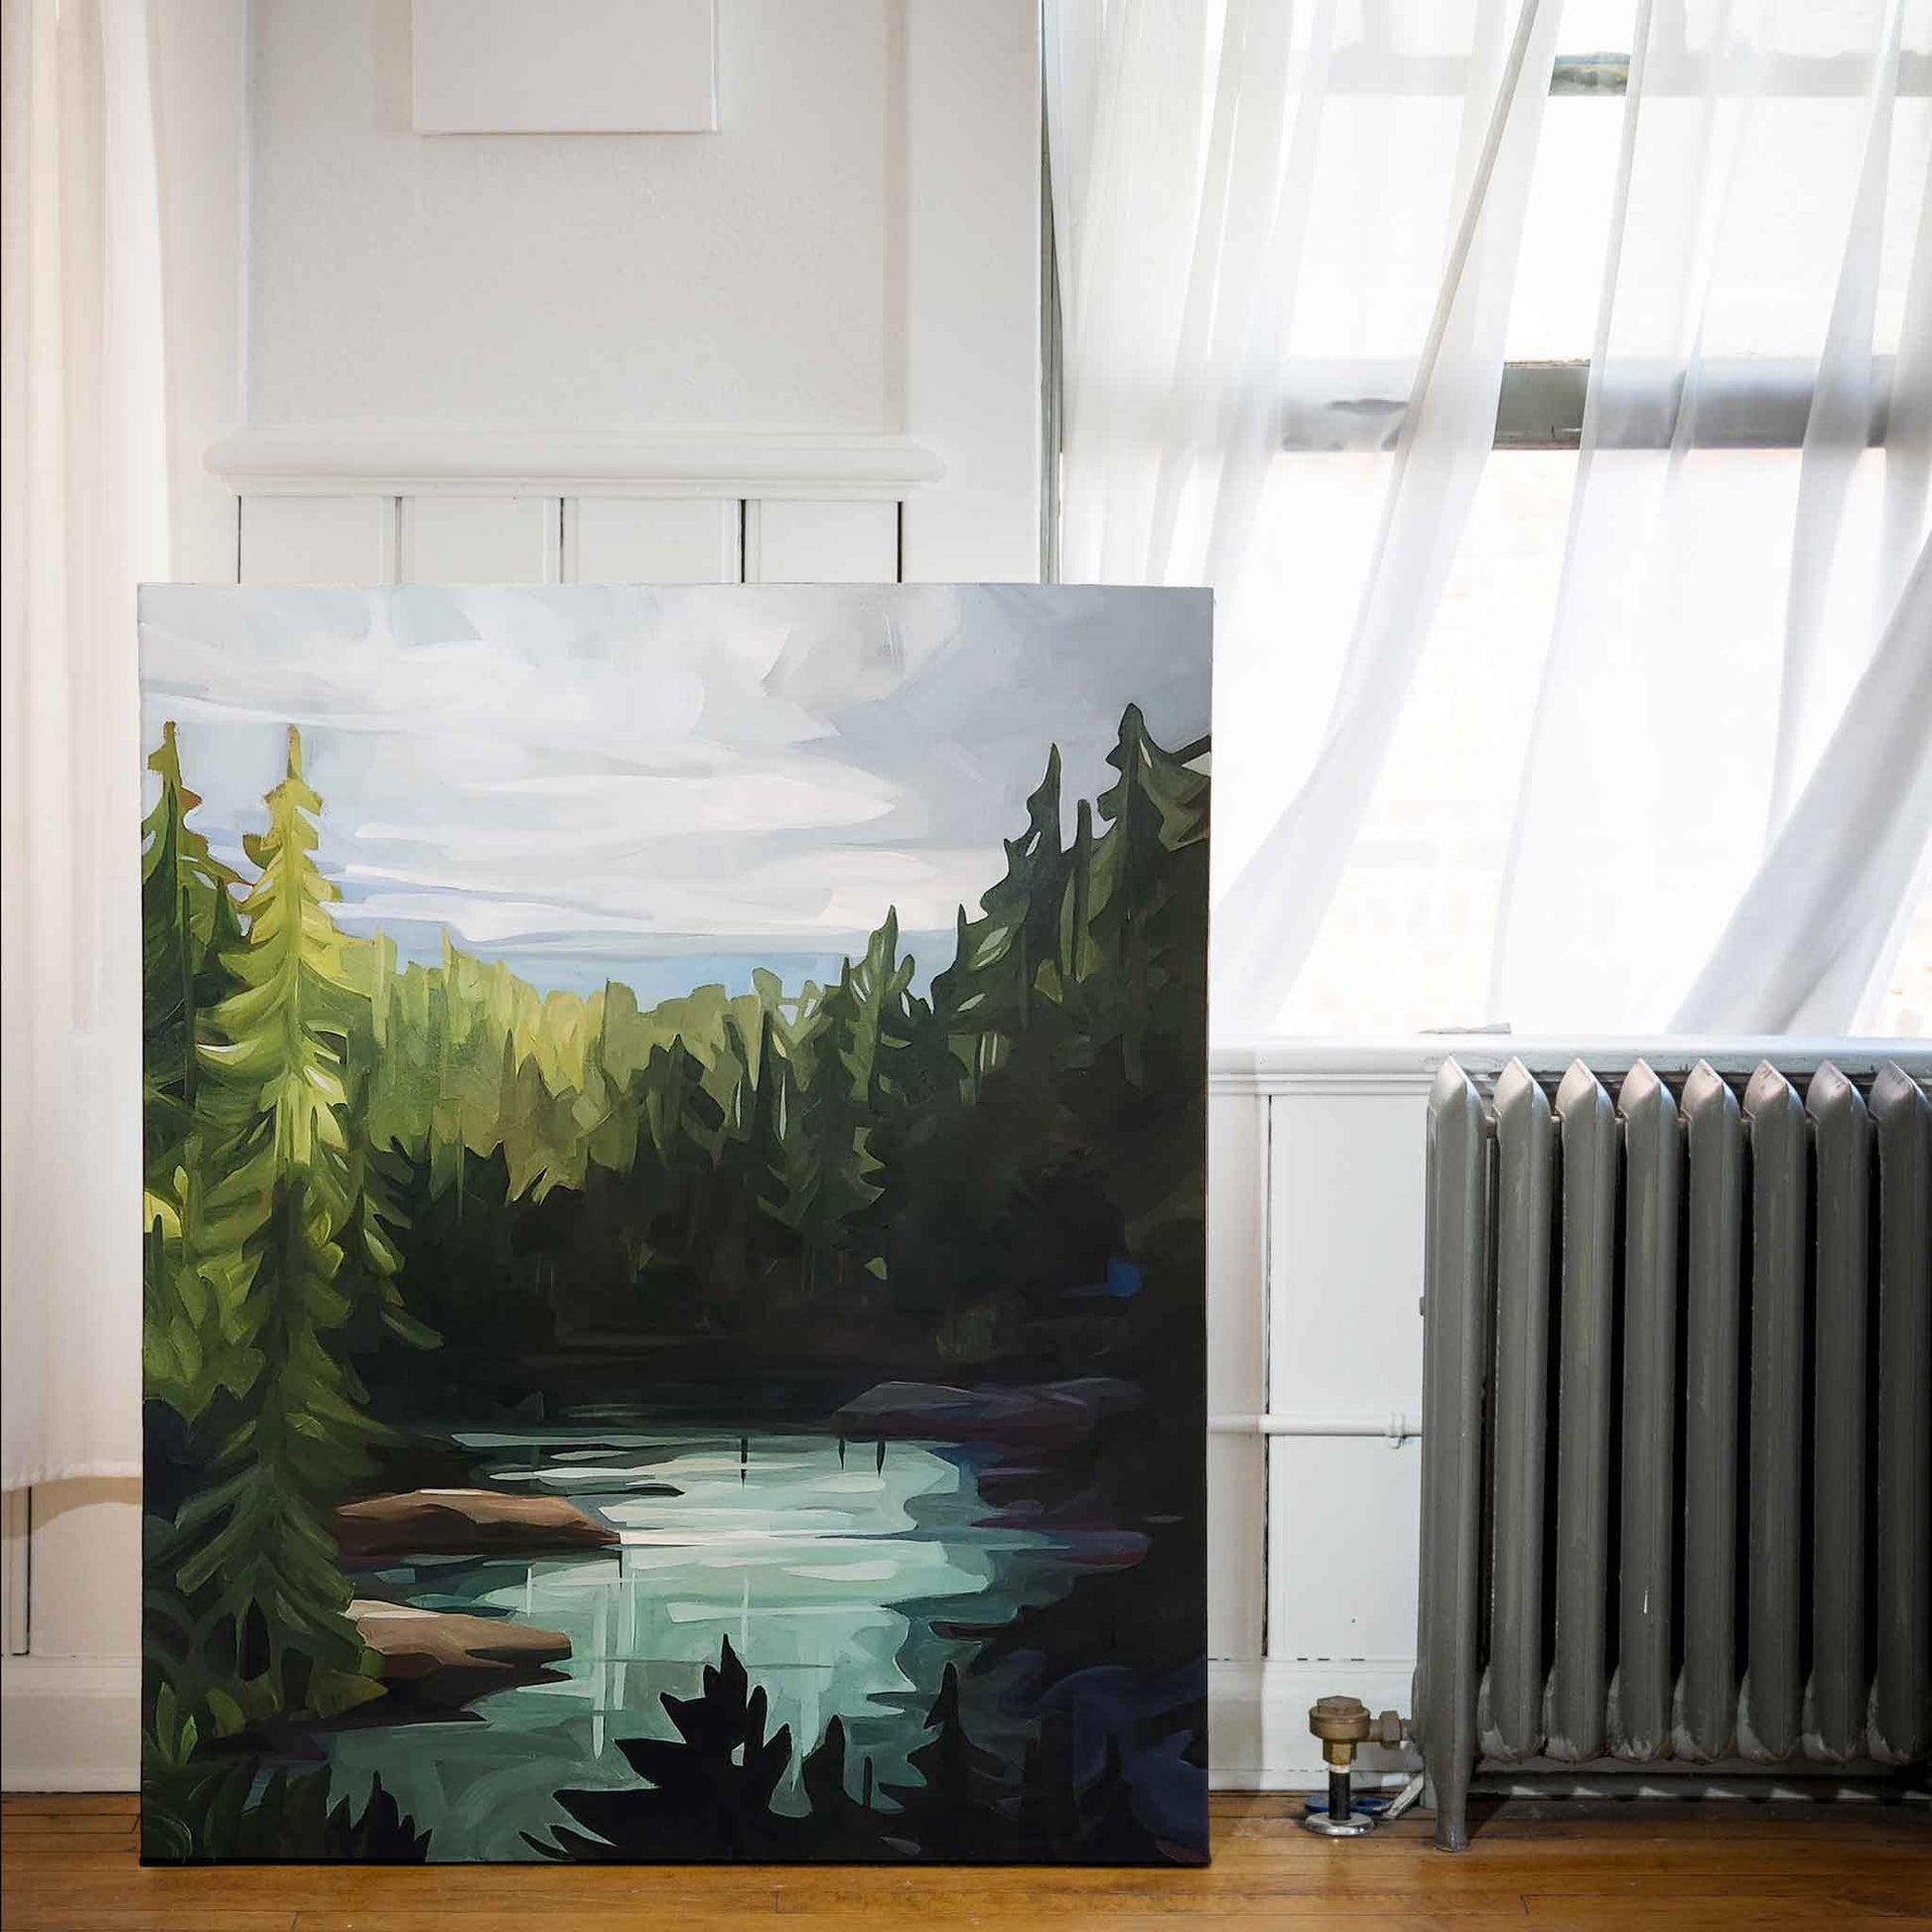 Westlake is an acrylic landscape painting of a lake in the forest showing the stunning view of a waterfall and the rocks surrounding the lake